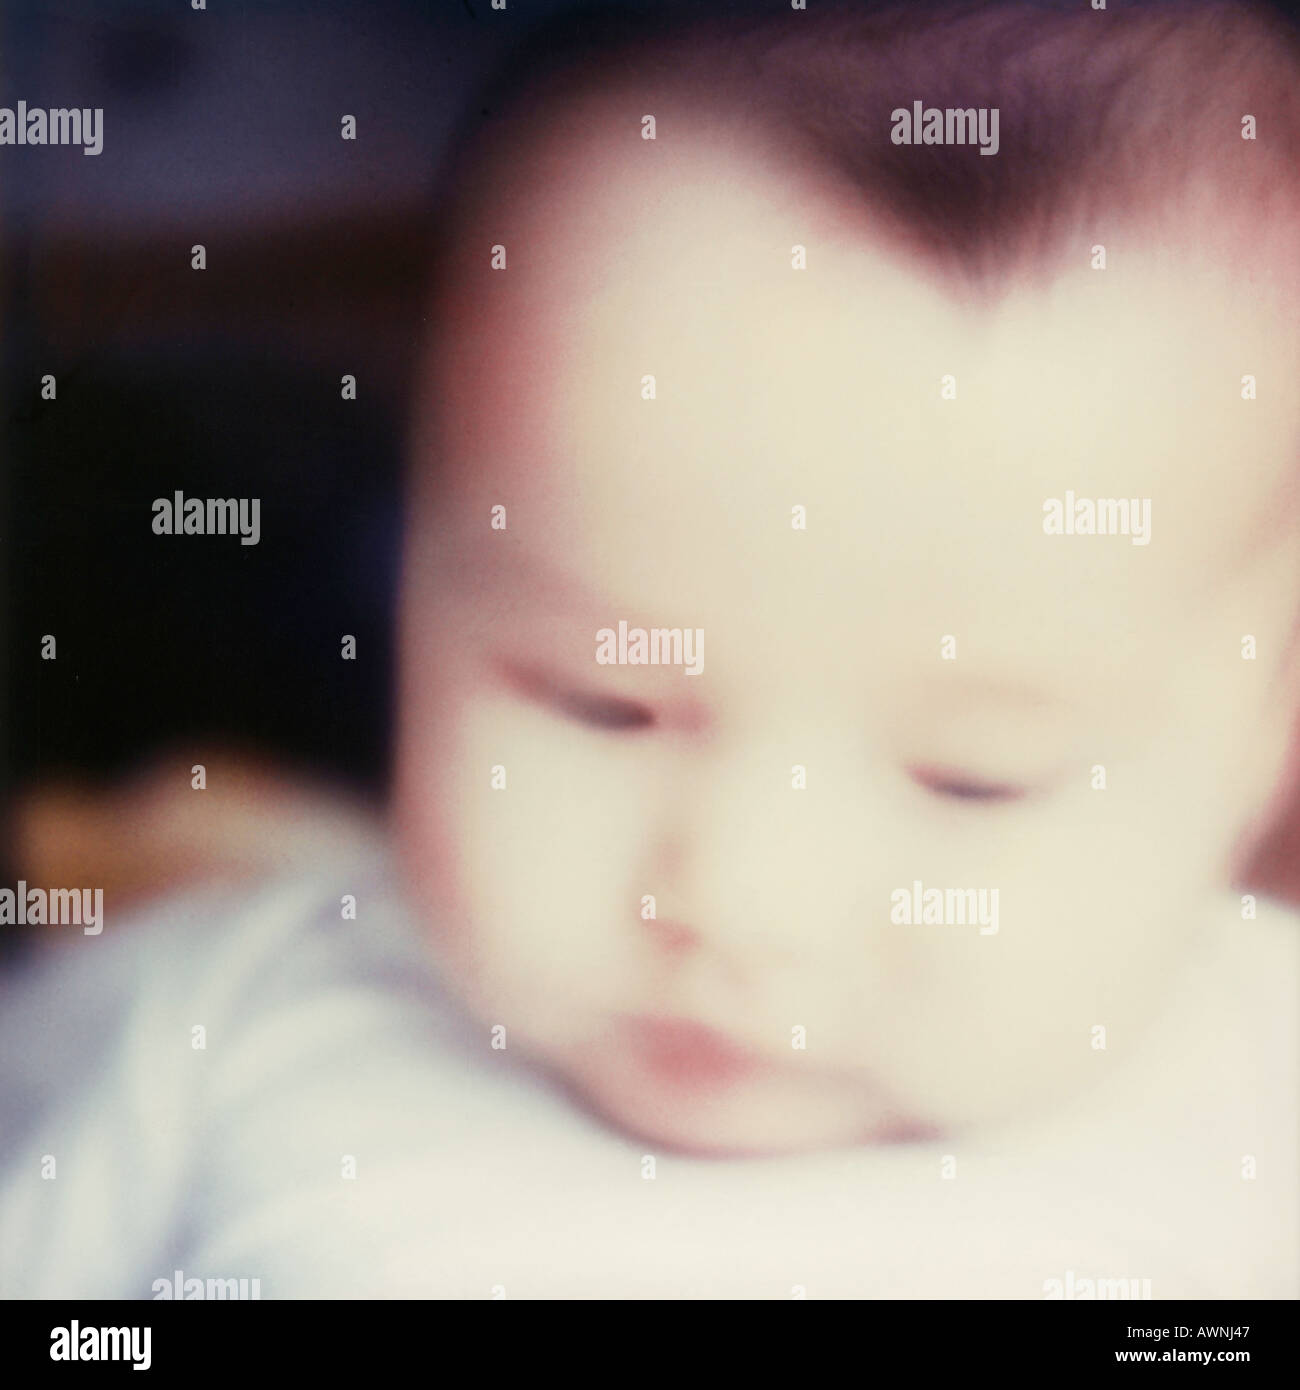 Baby looking down, close-up, blurred. Stock Photo